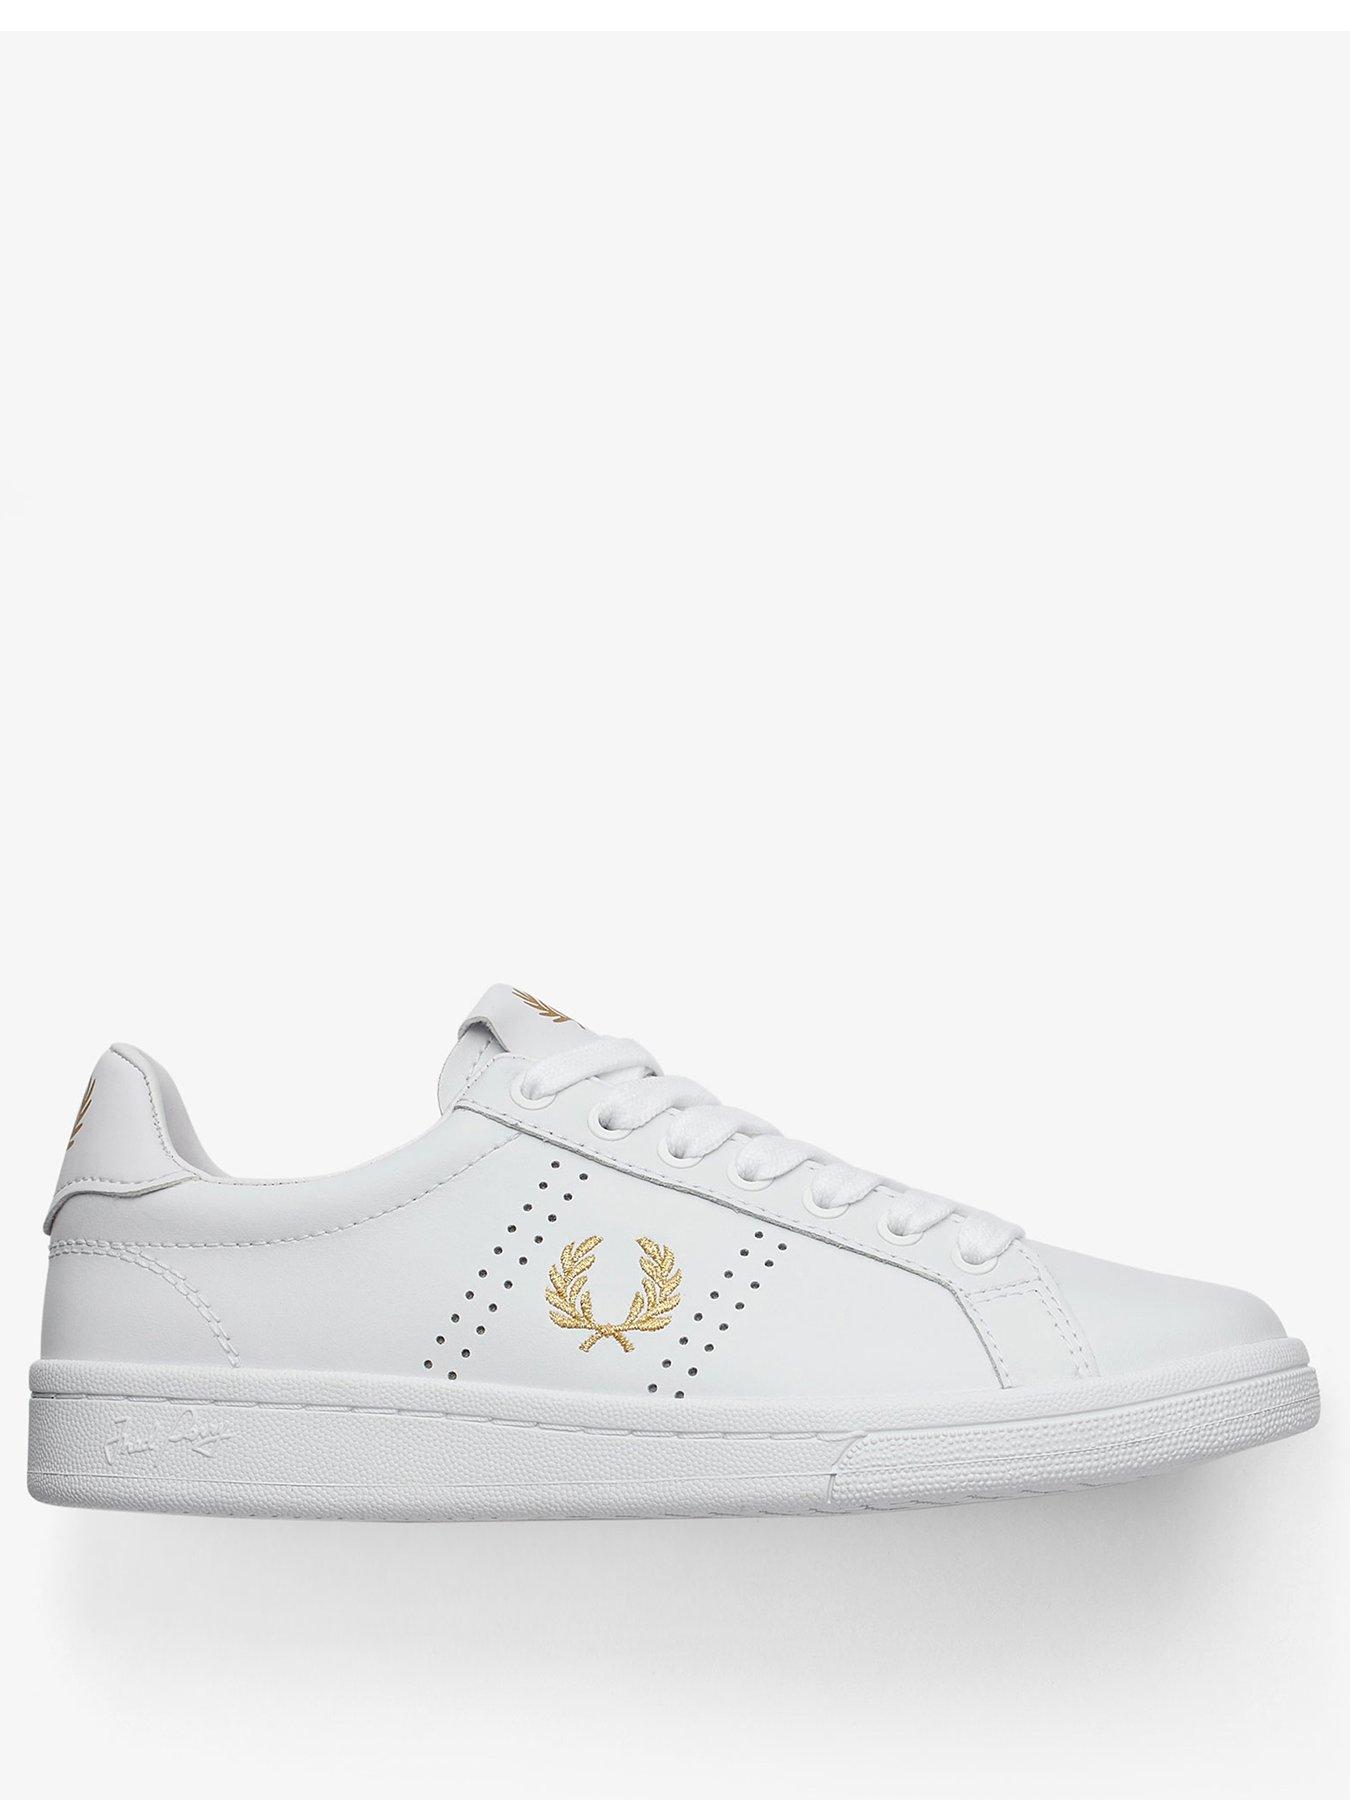 fred perry female shoes